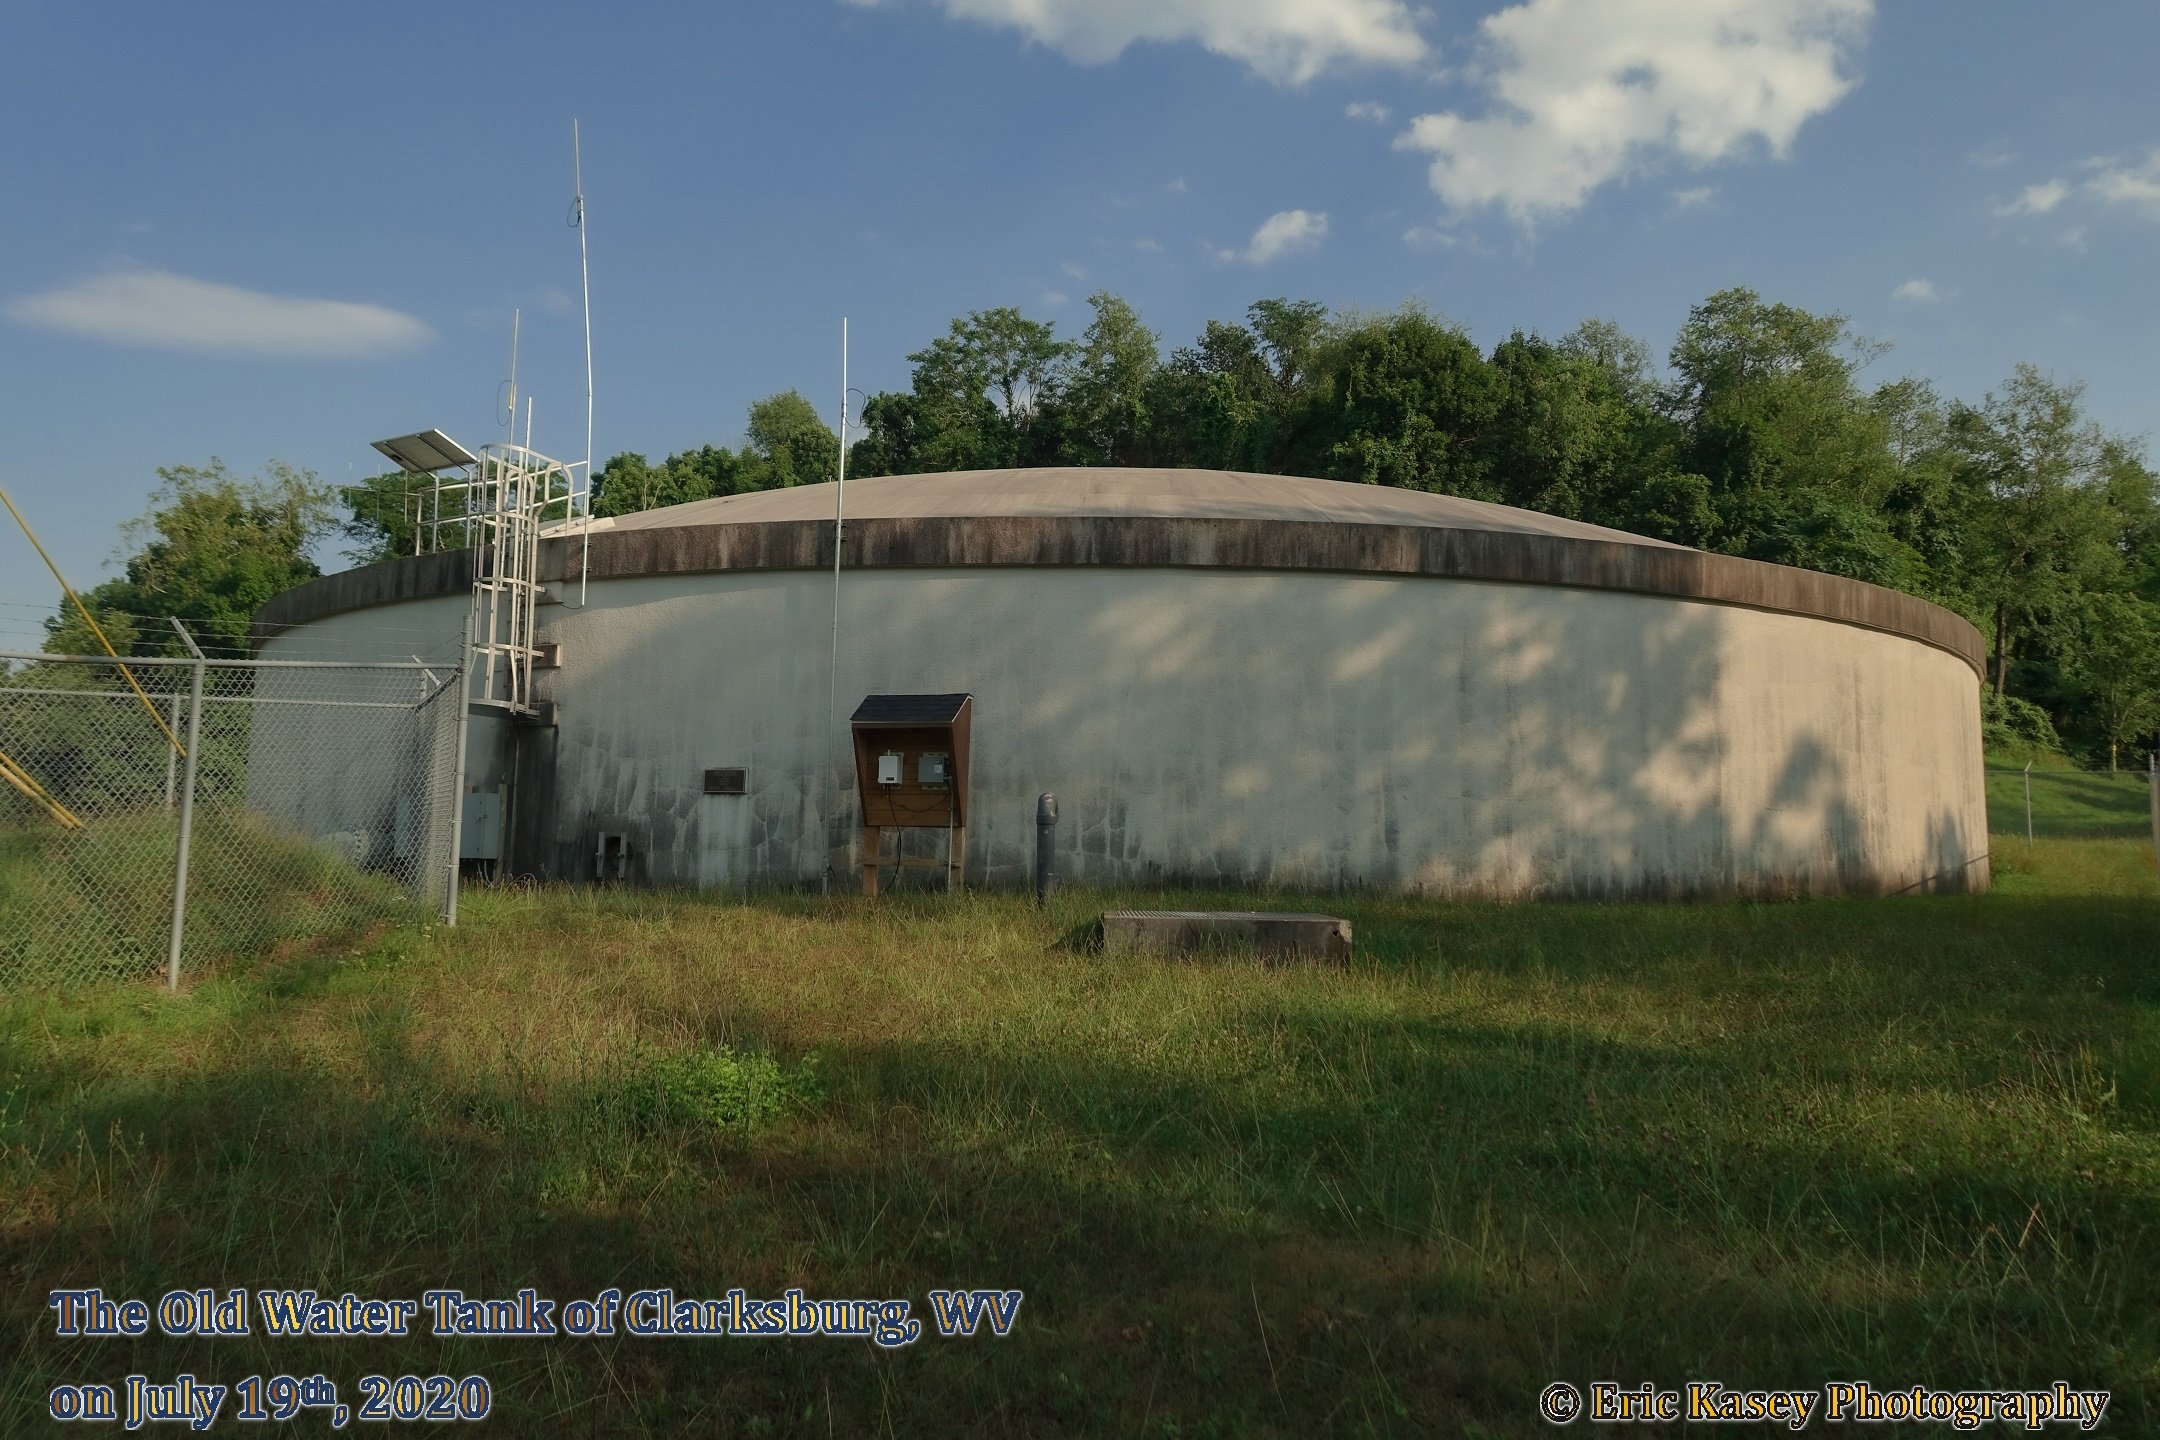 42 - The Old Water Tank of Clarksburg, WV on July 19th, 2020.JPG